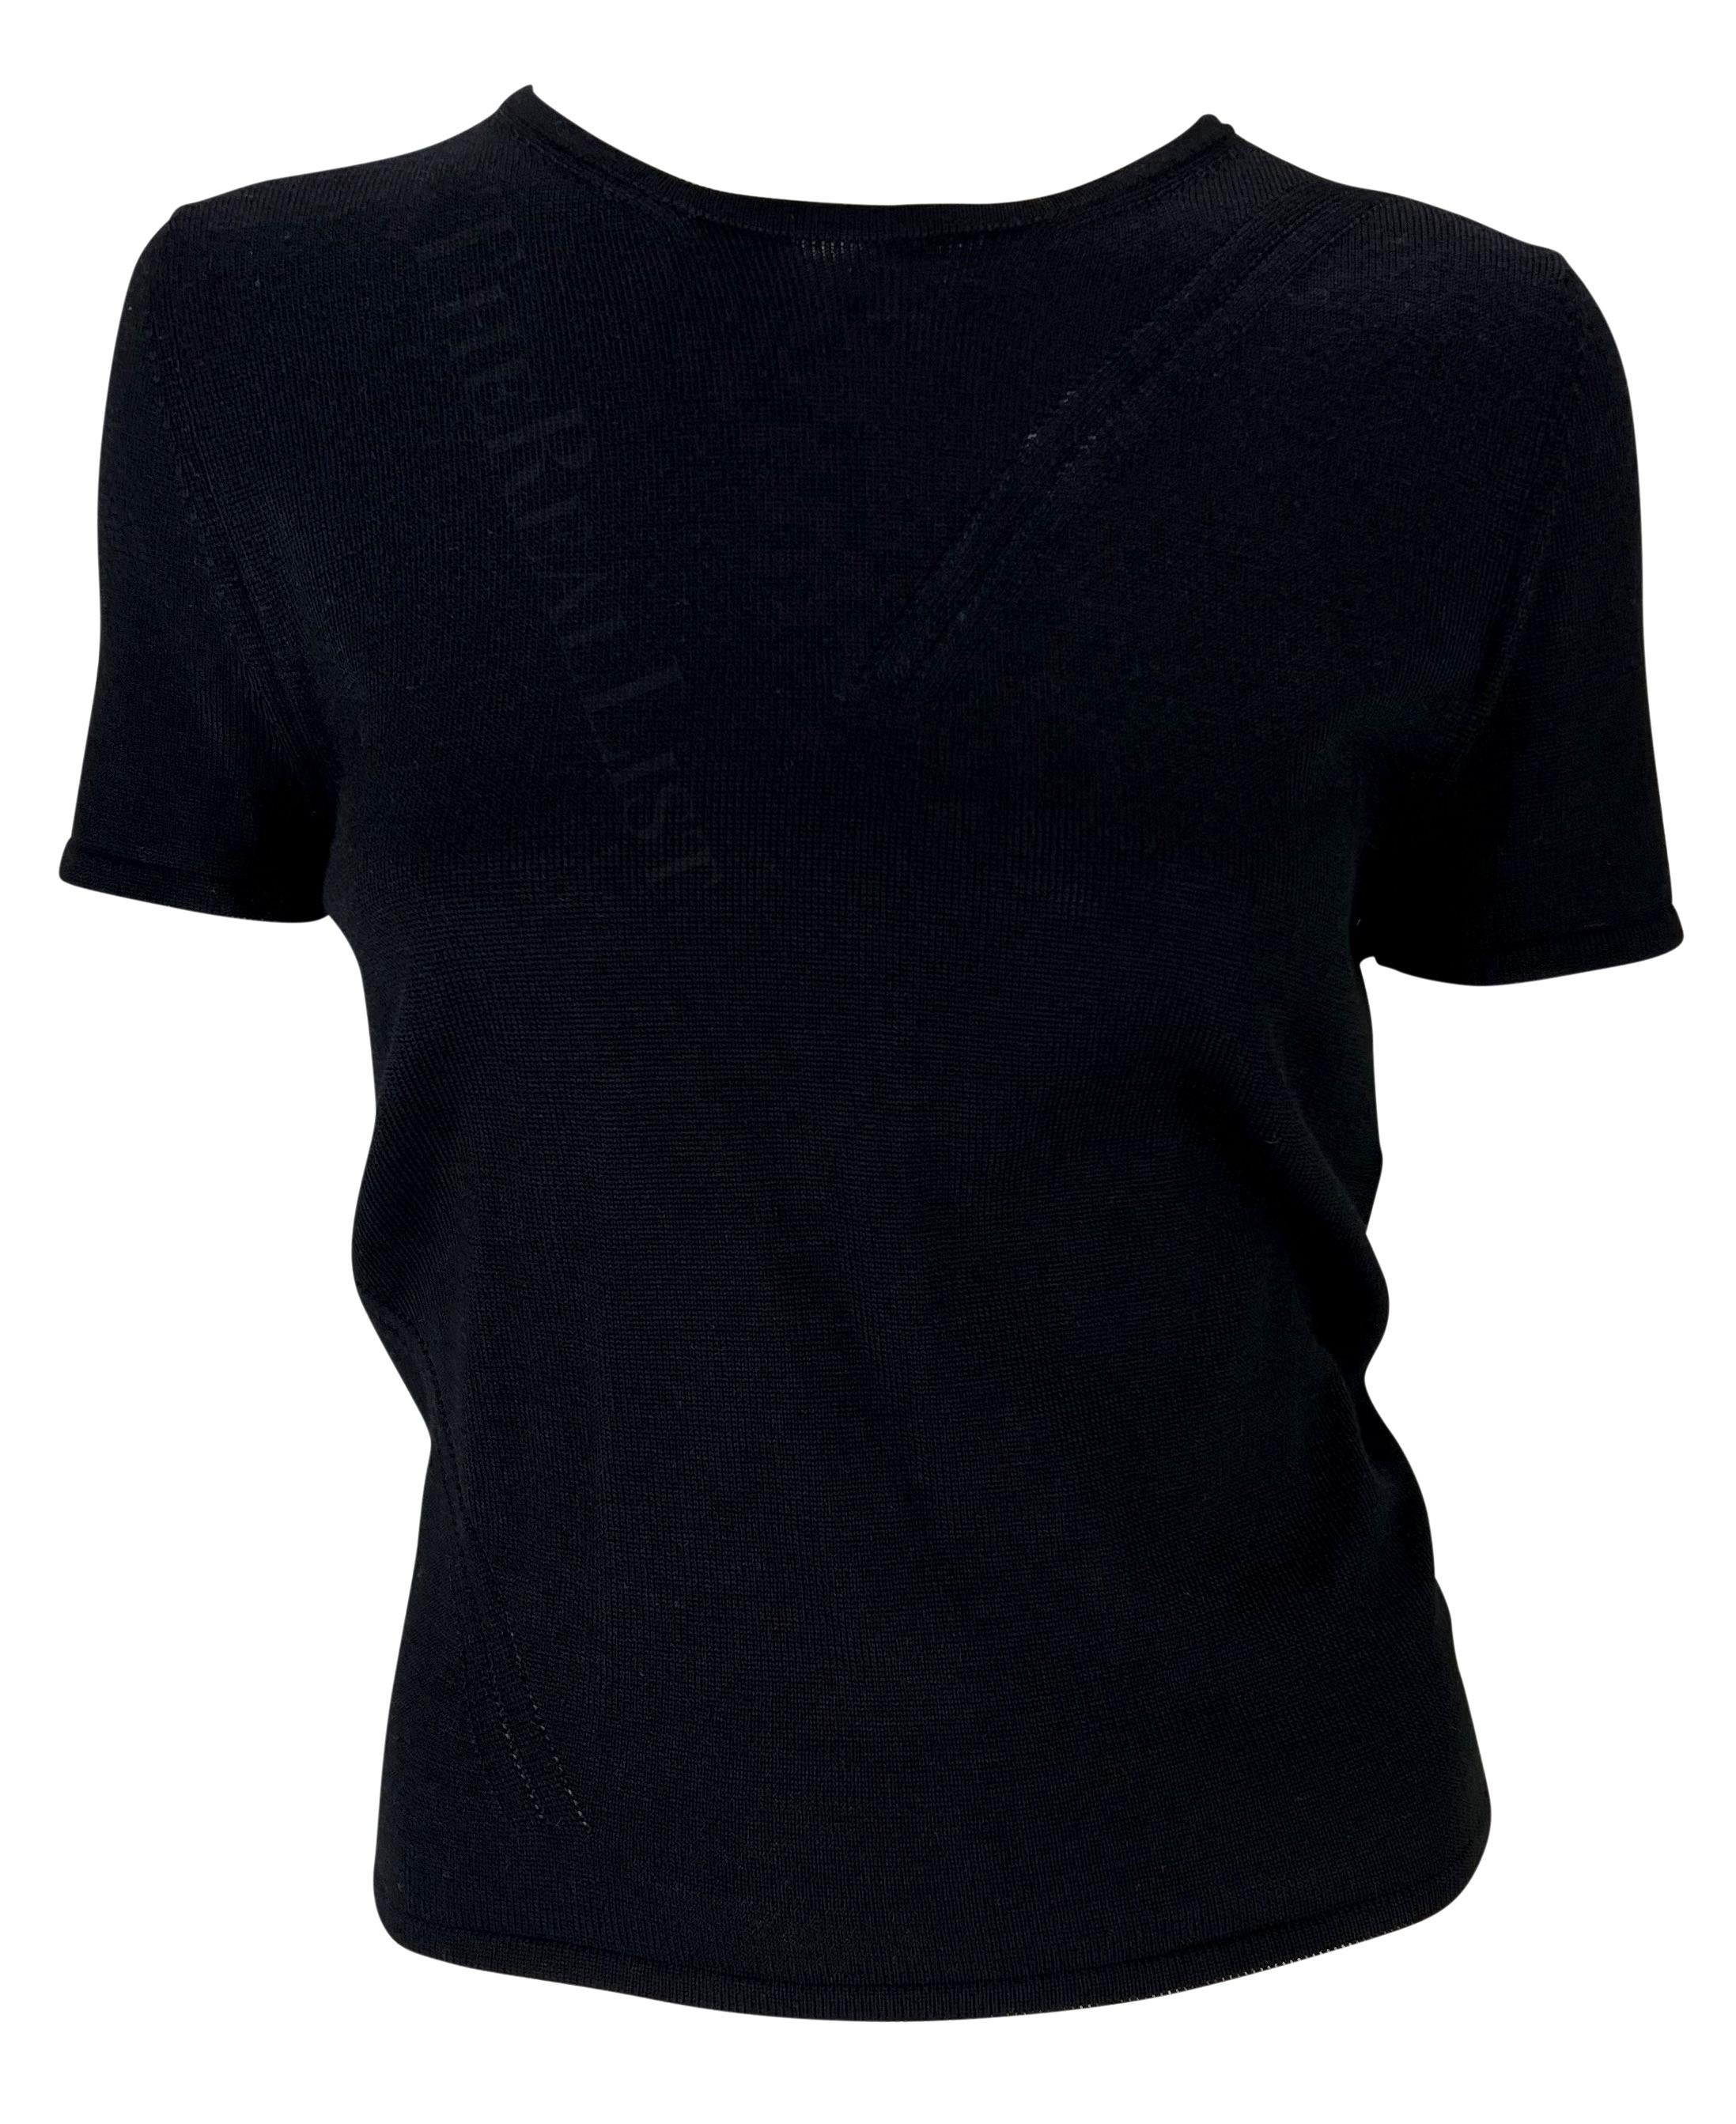 S/S 1997 Gucci by Tom Ford Open Back Black Stretch Knit Short-Sleeve Top Pour femmes en vente